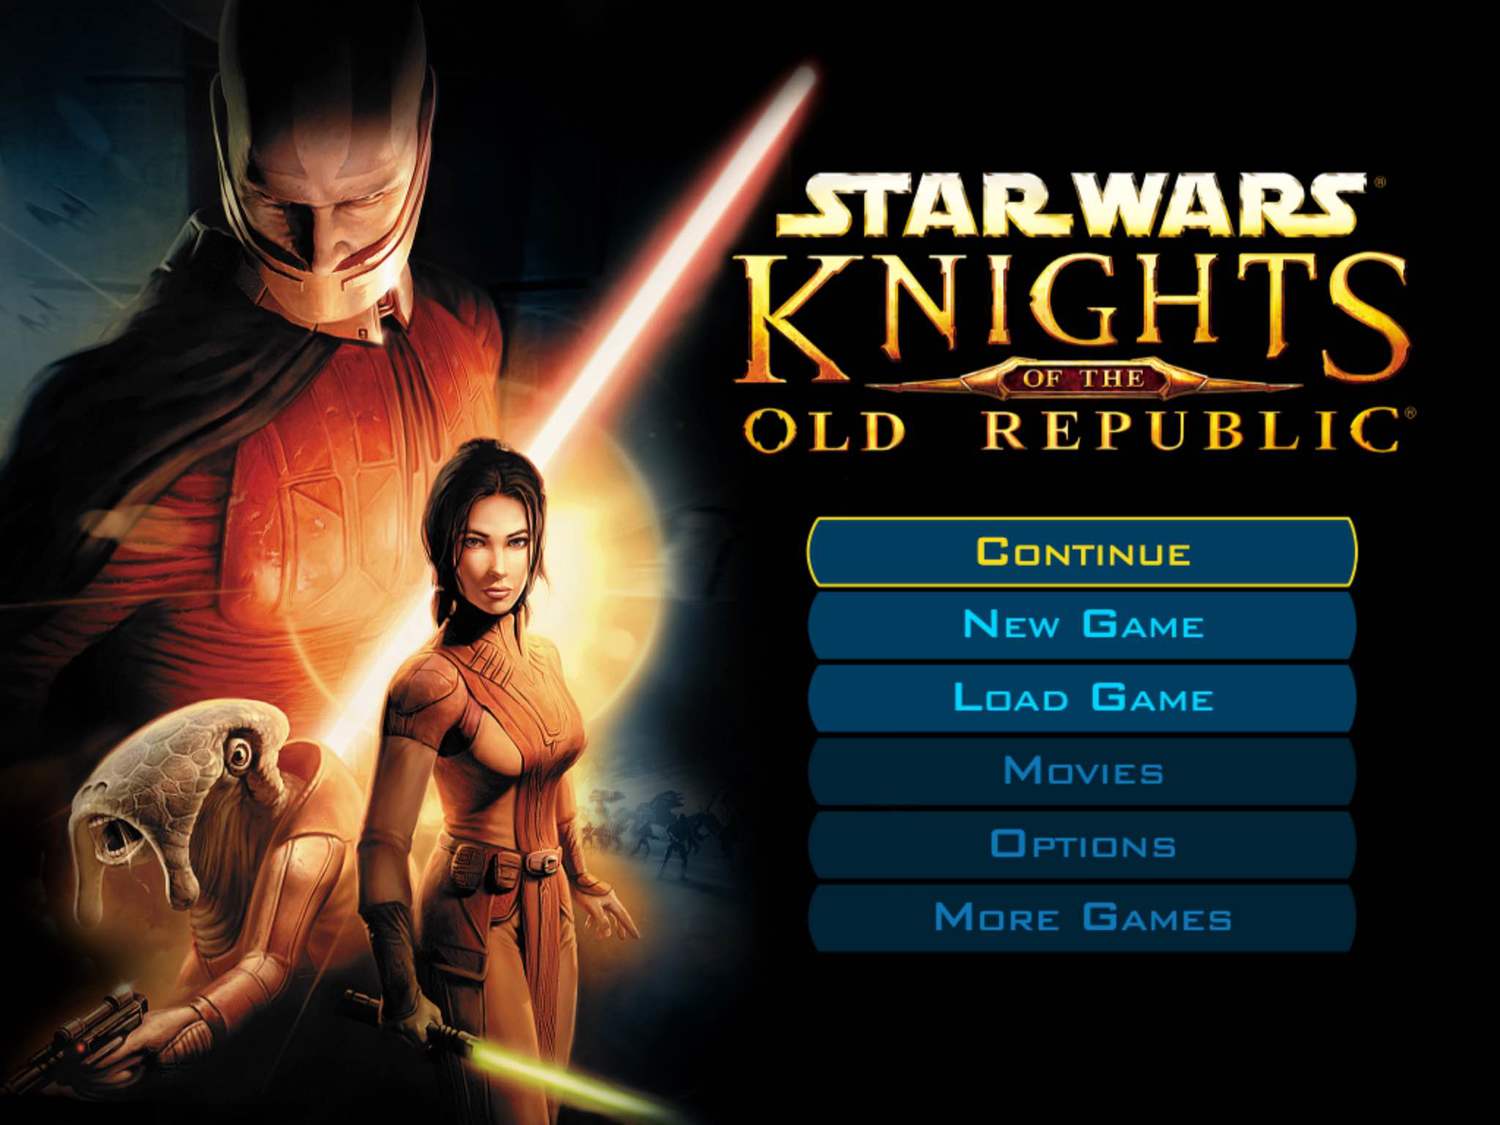 Star wars knight of the old republic 2 русификатор steam фото 81